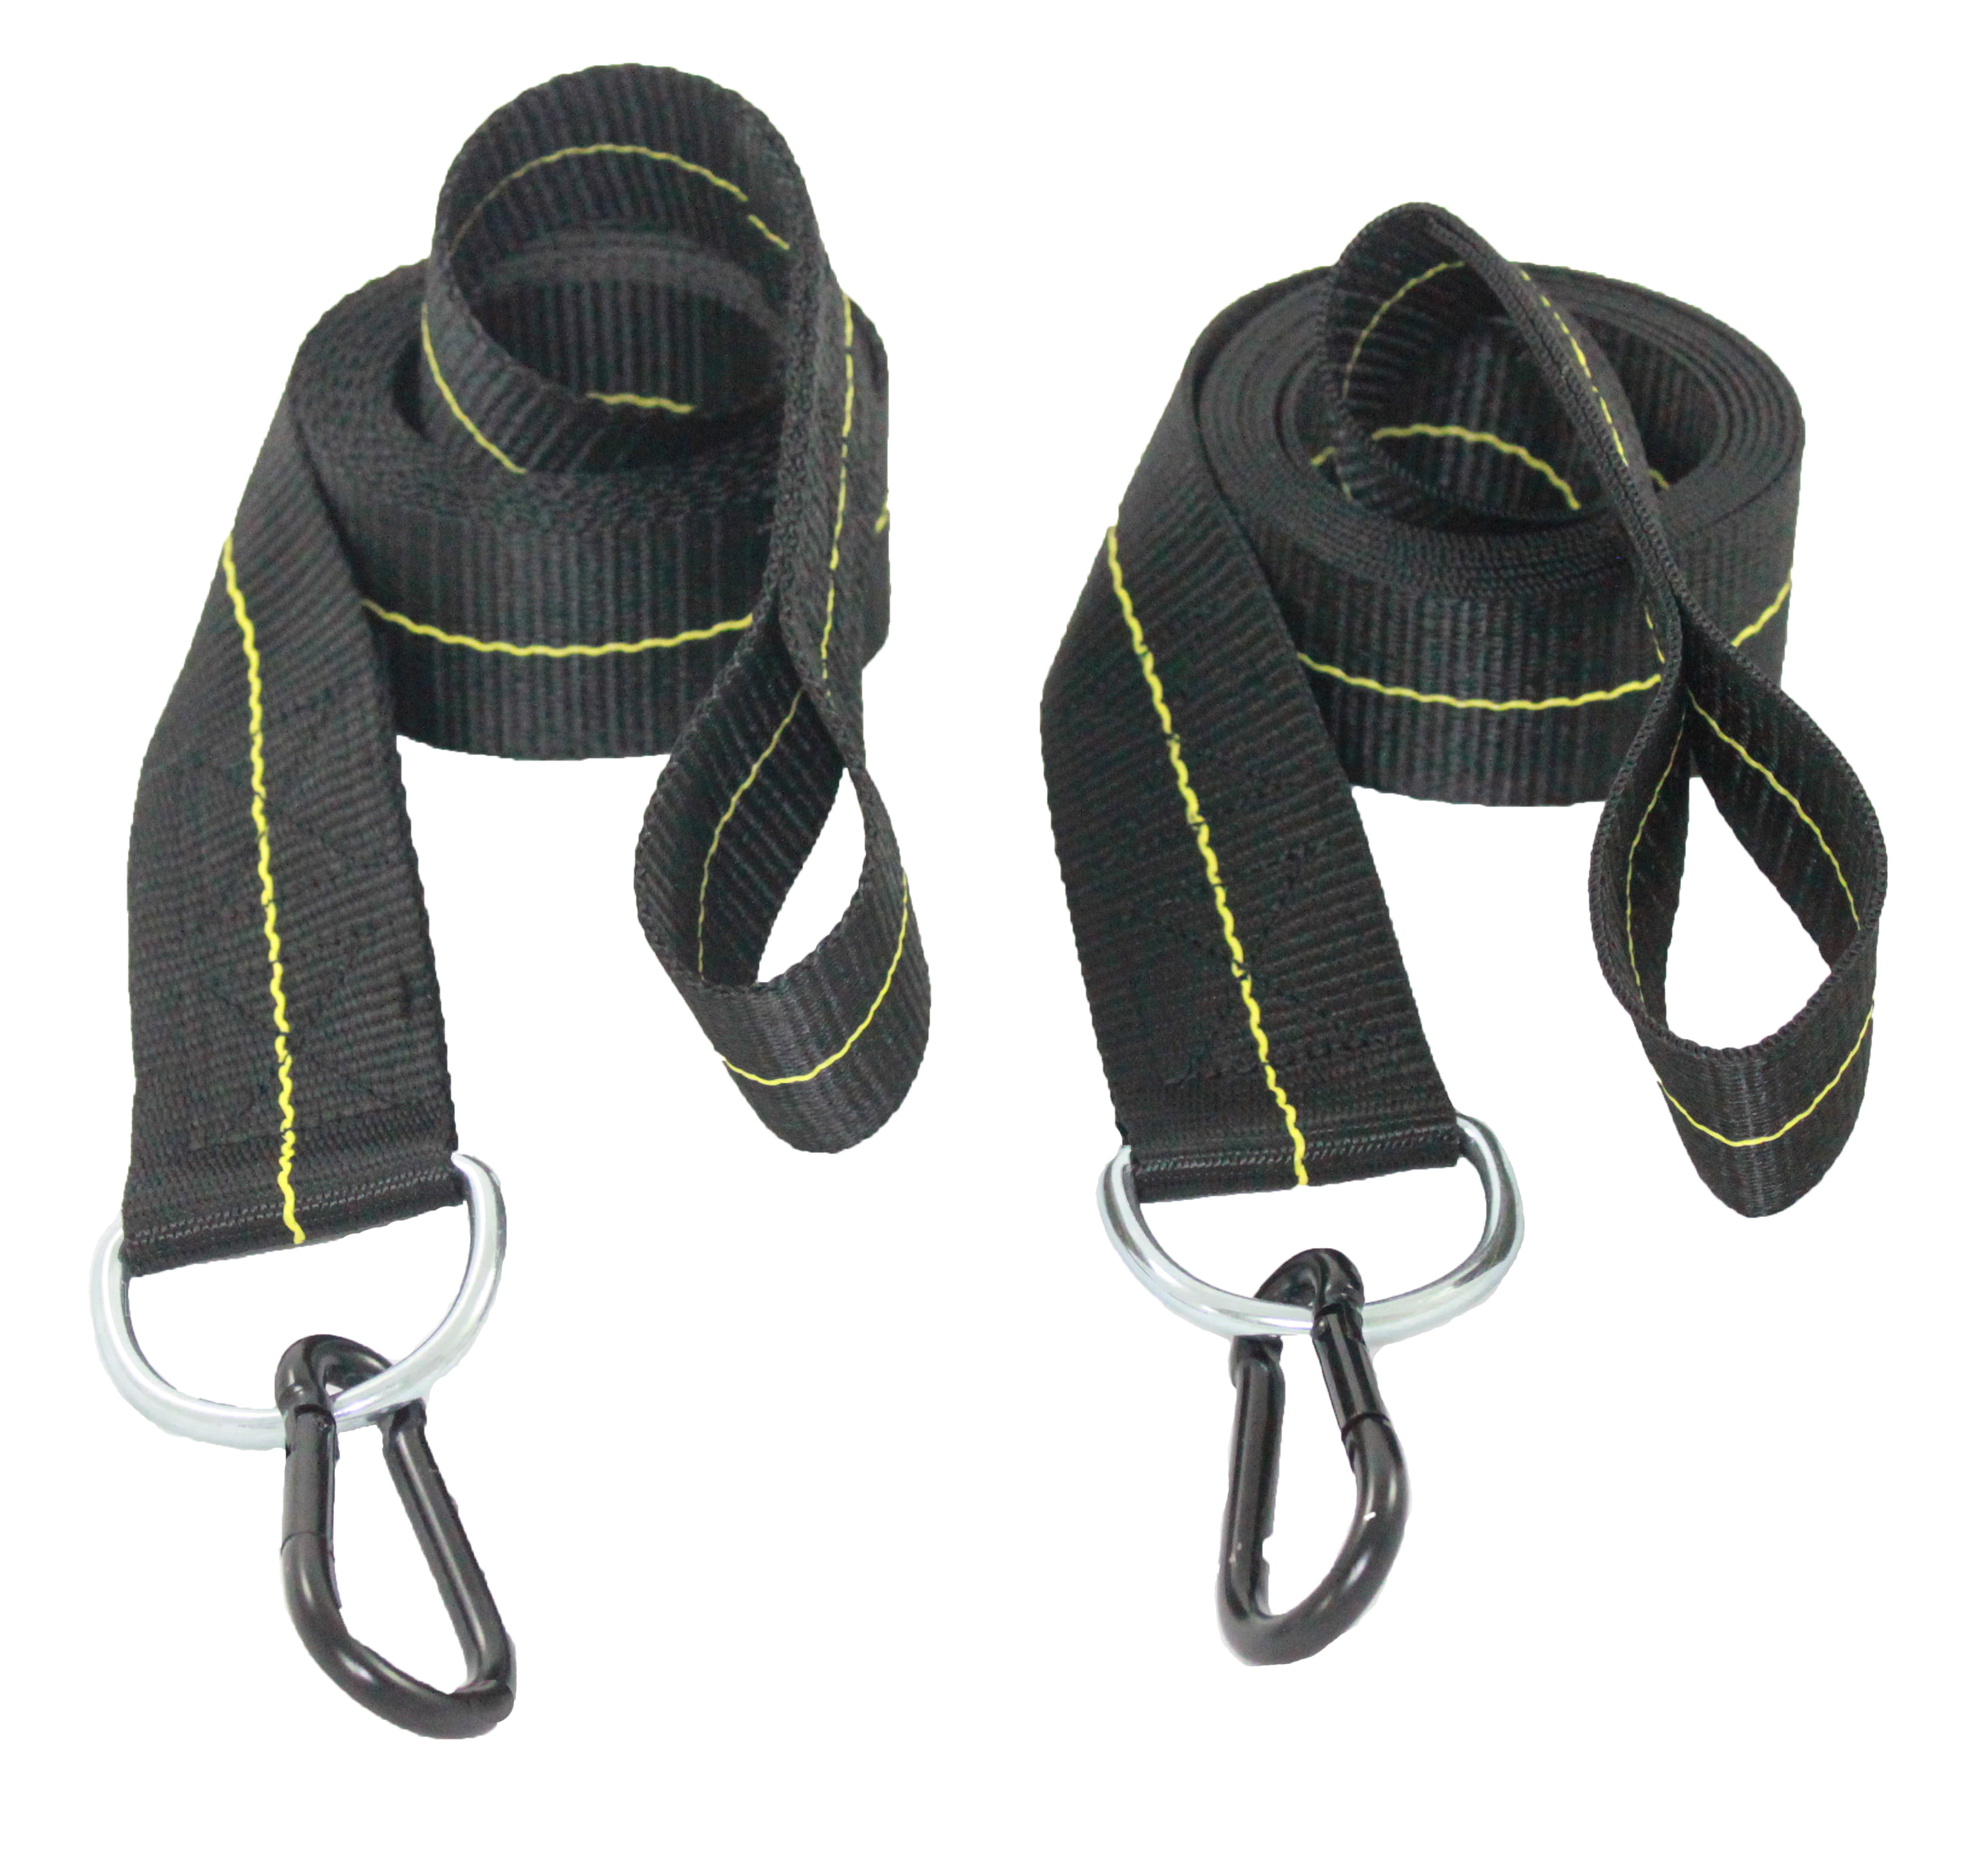 1.1 Wide & Safe for Trees NCal Outfitters Grizzly Hammock Straps Set of 2 Non-Stretch 11 Reflective Straps with Stainless Steel Cinch Buckles for Strength & Easy Adjustment